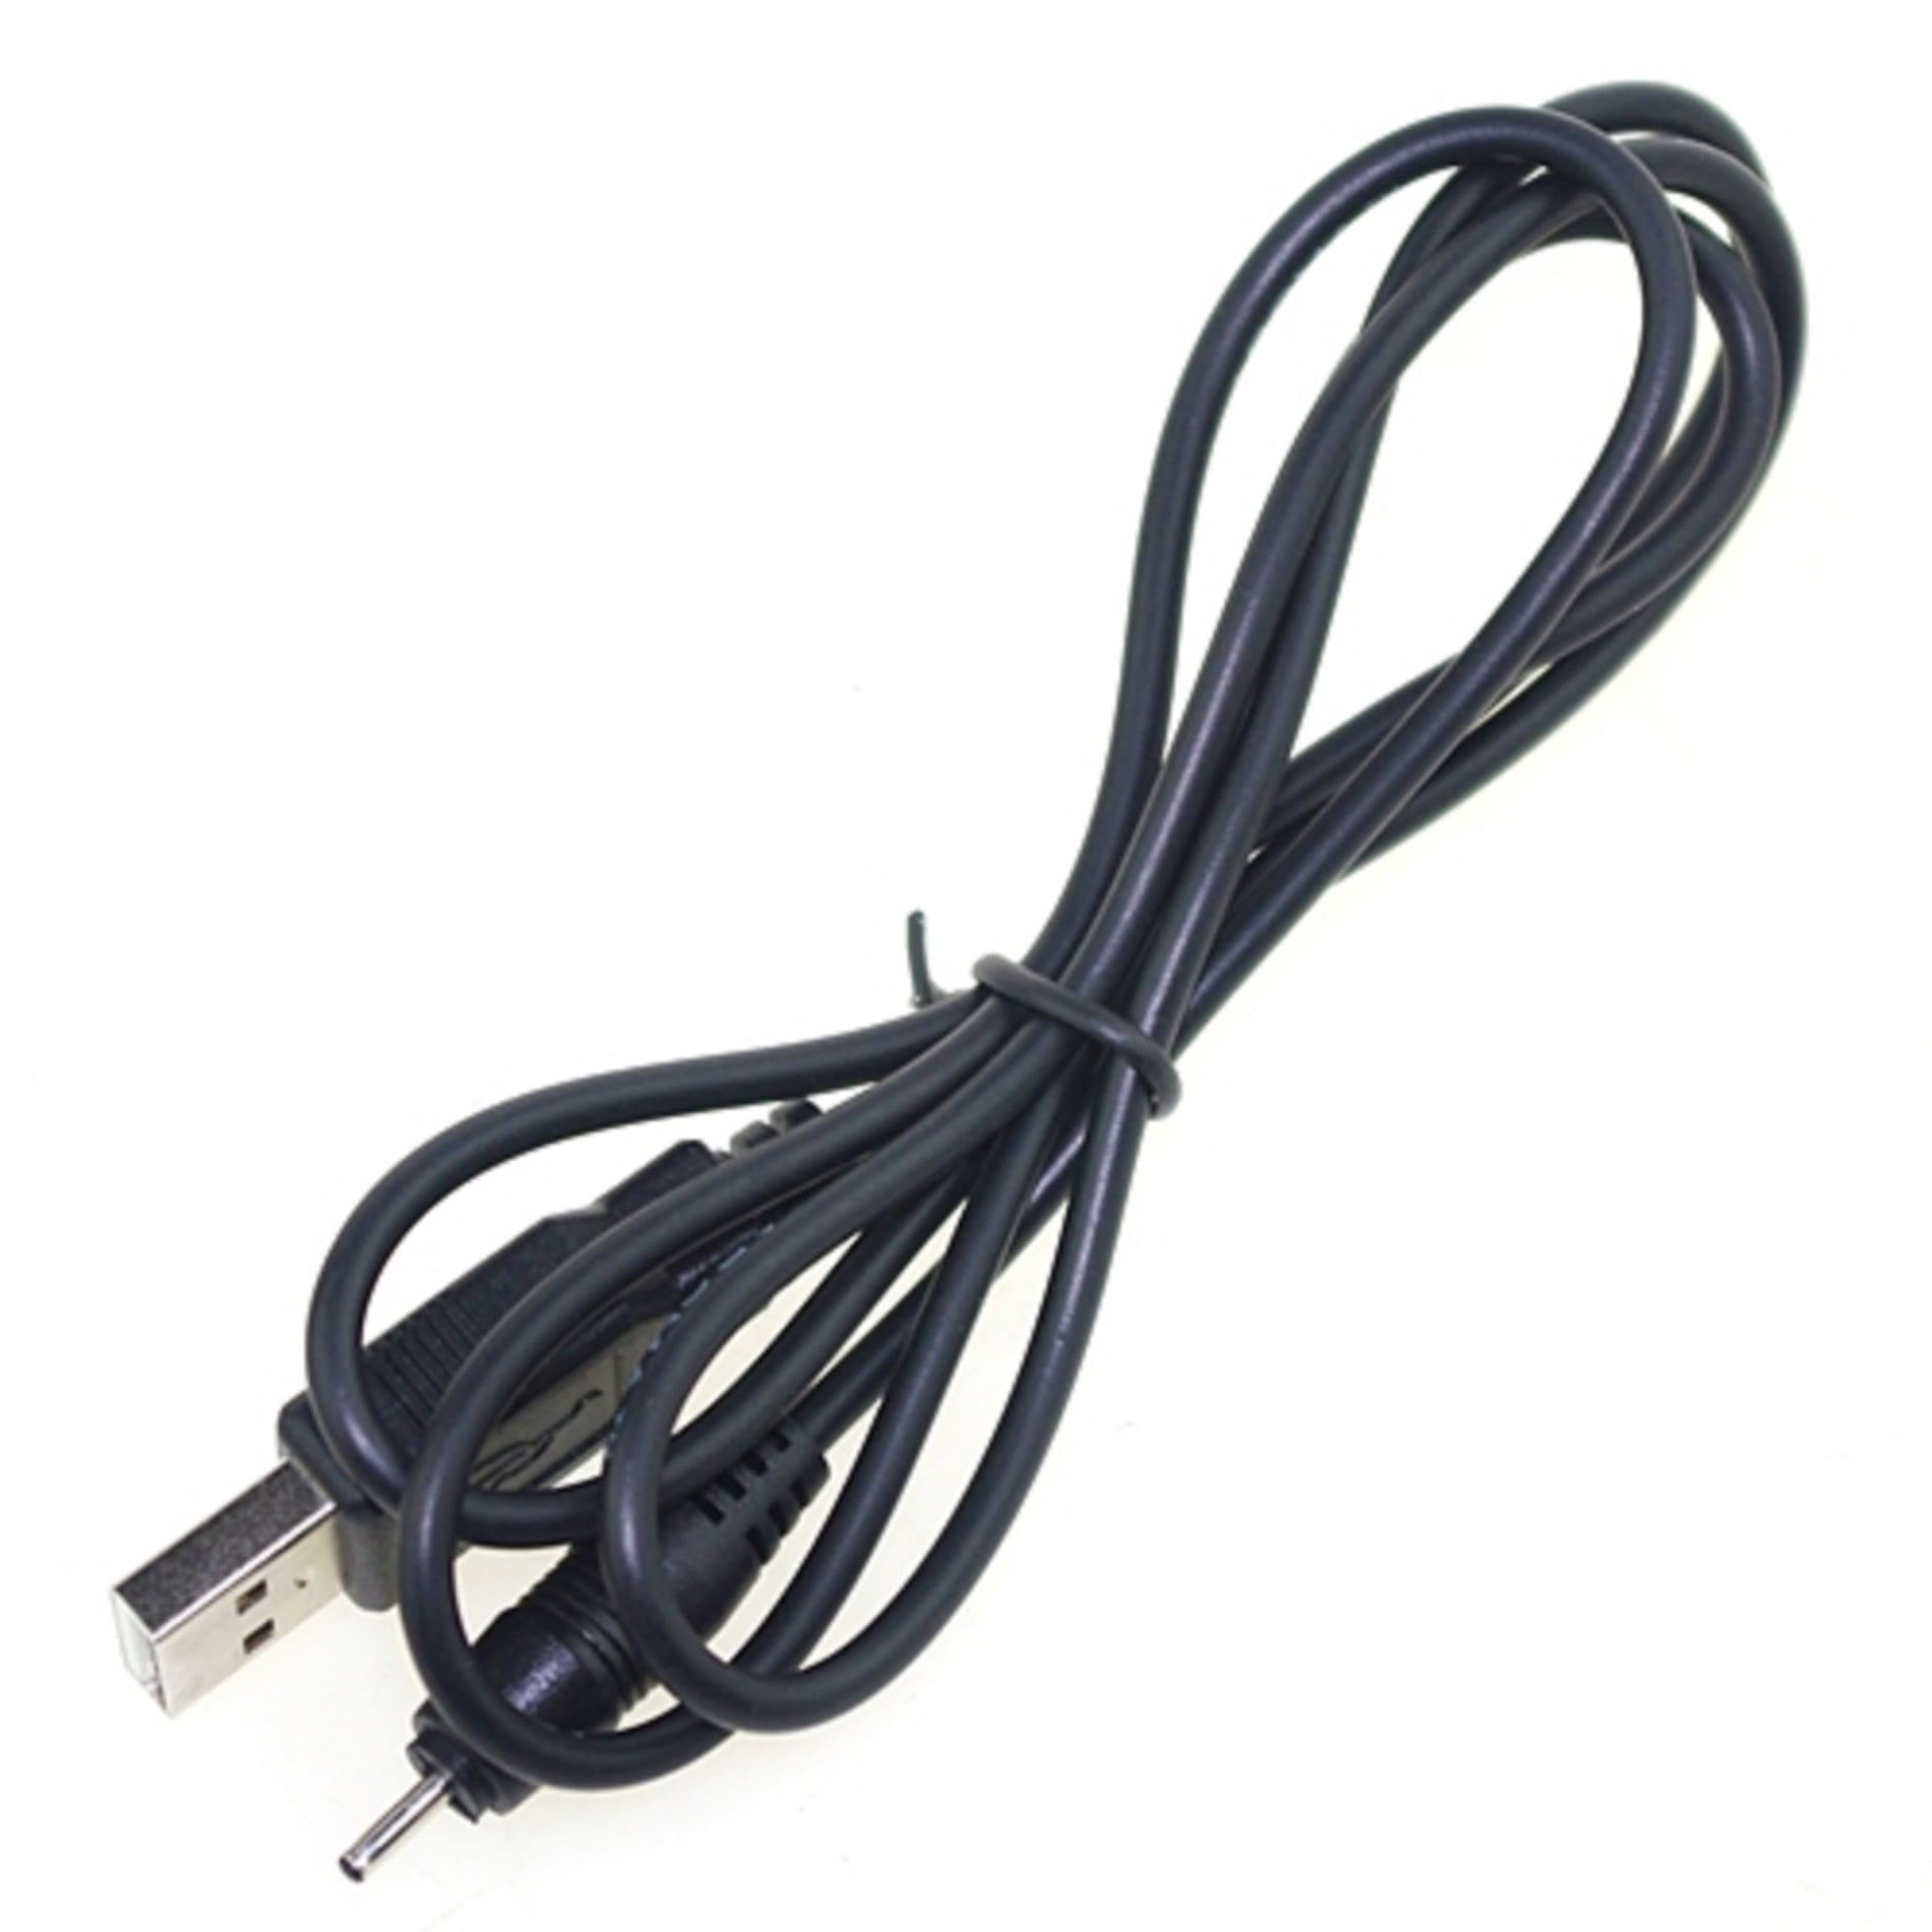 USB Cable Charger For NOKIA AC-4U N800 1650 2320 1616 2330 2680 2630 2660 3610 